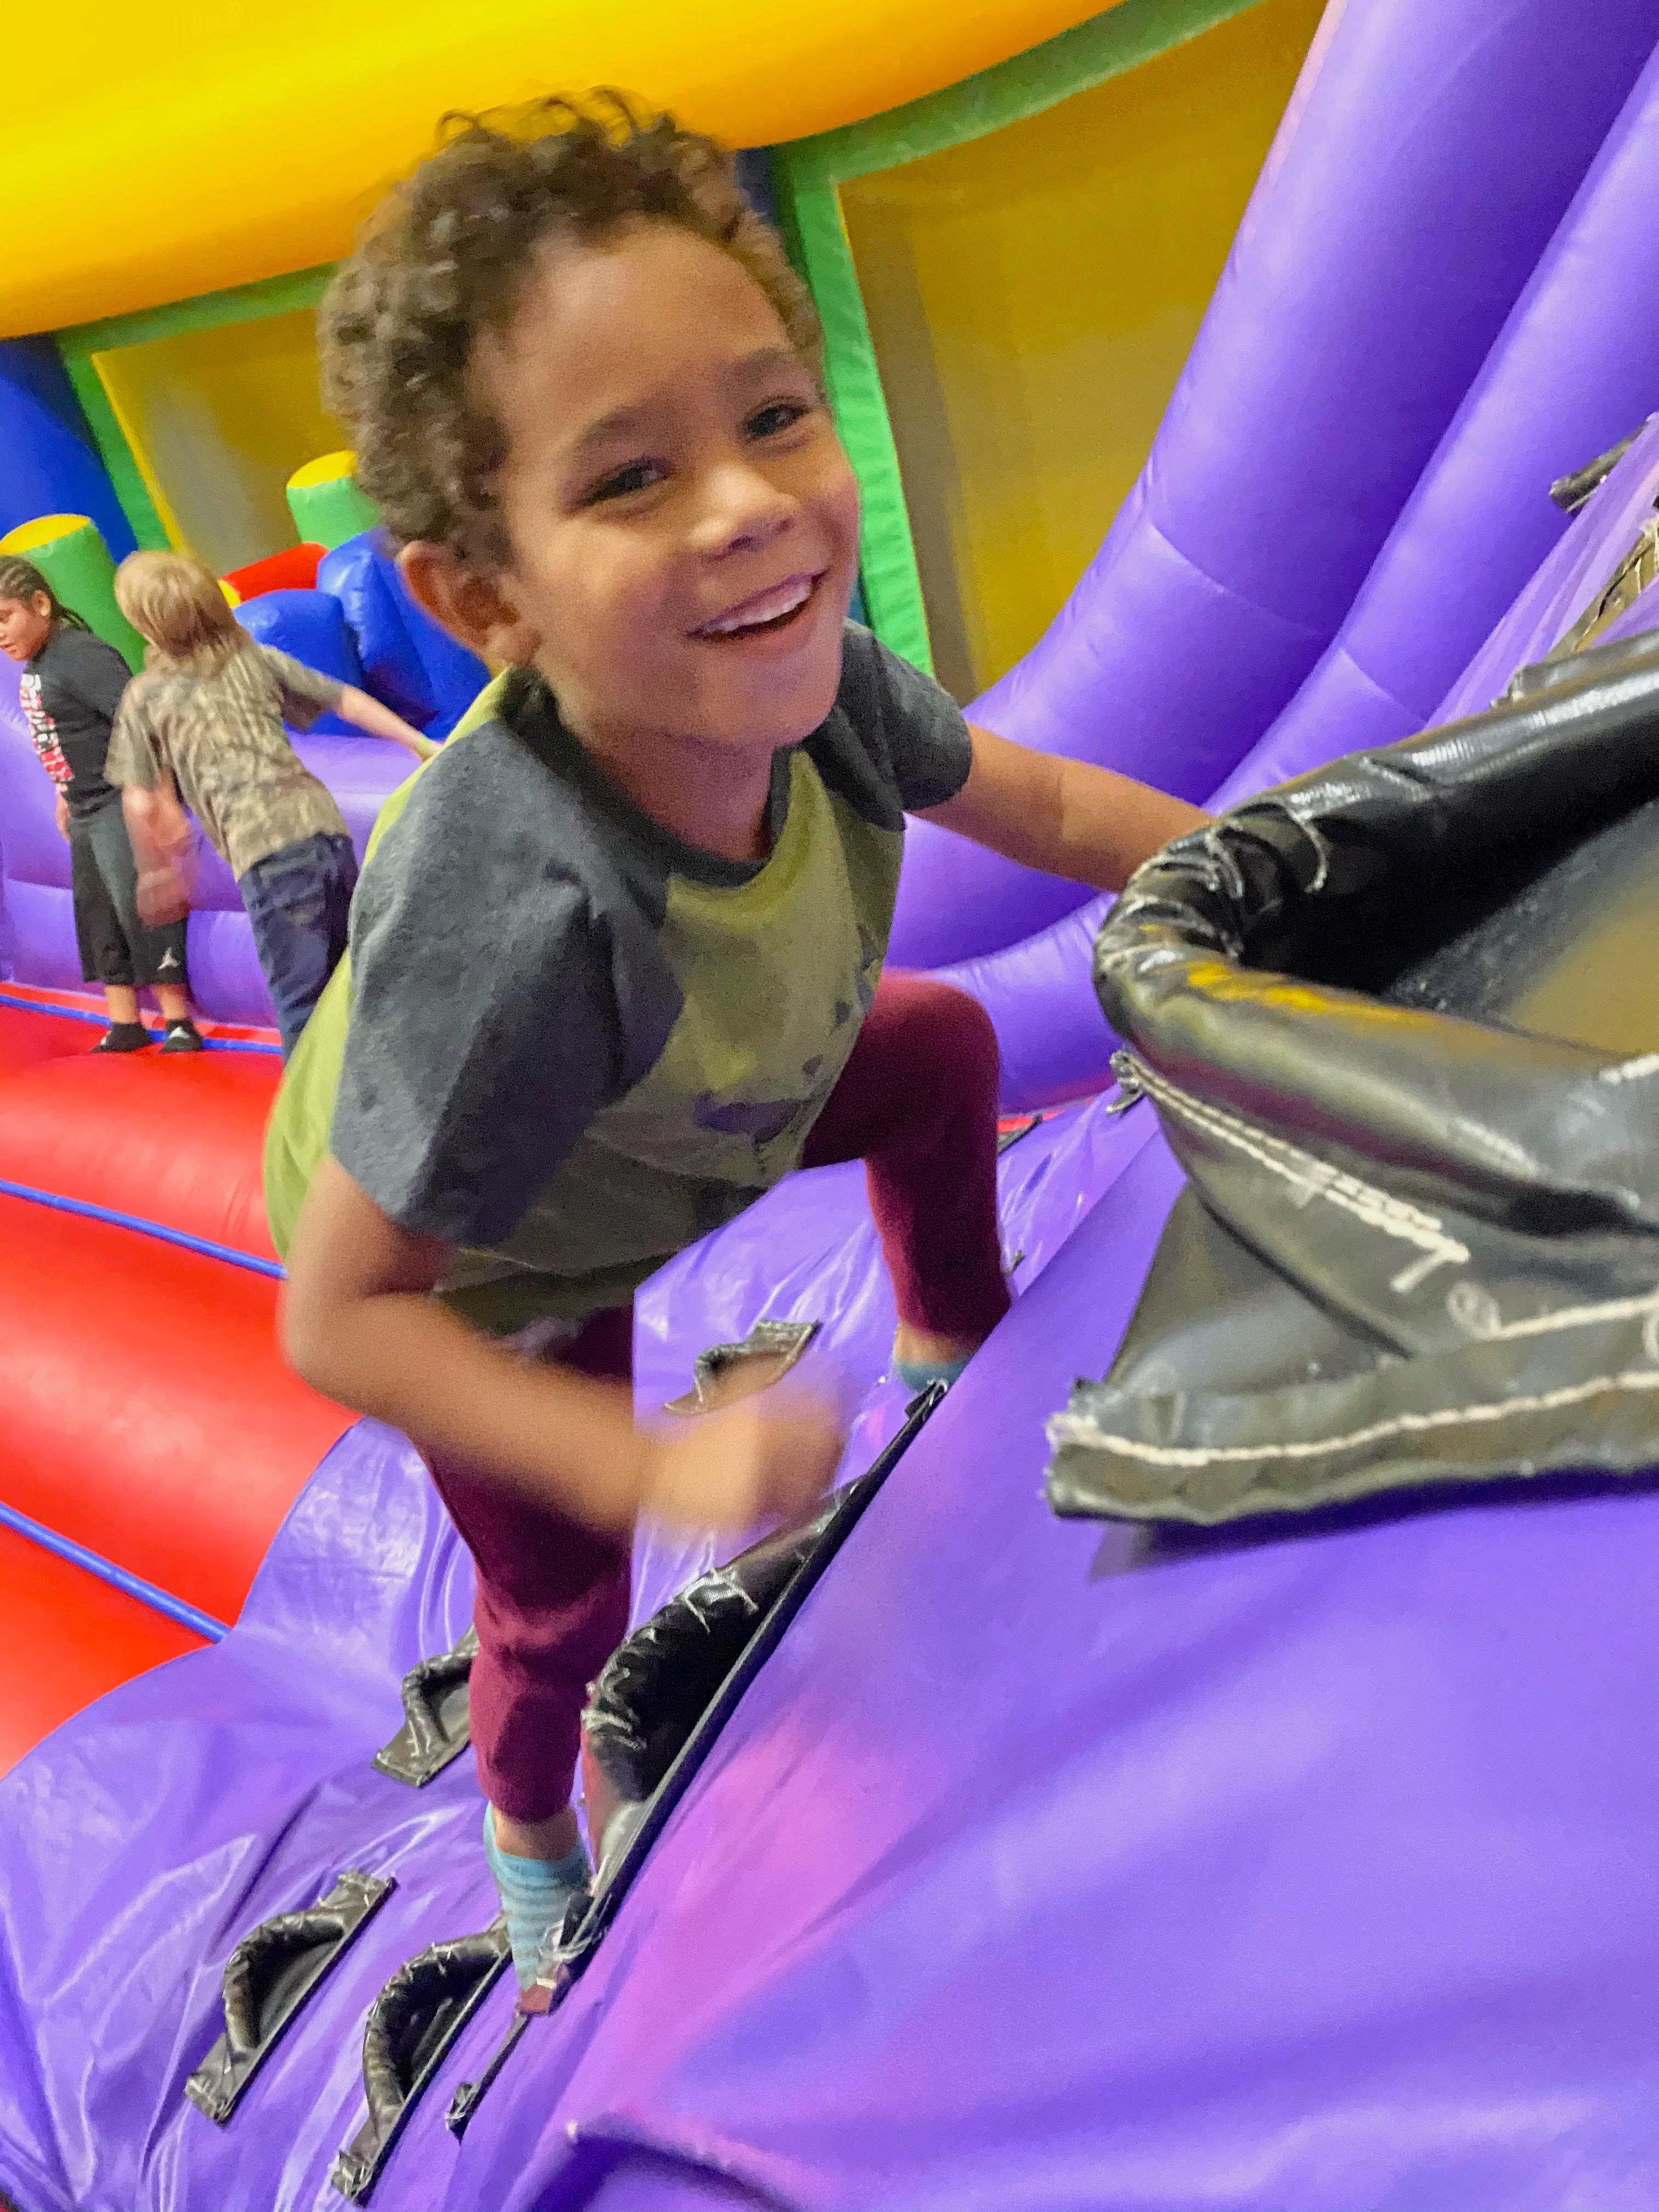 The Inflatable Fun Factory - Evansville, IN 47715 - (812)502-5140 | ShowMeLocal.com